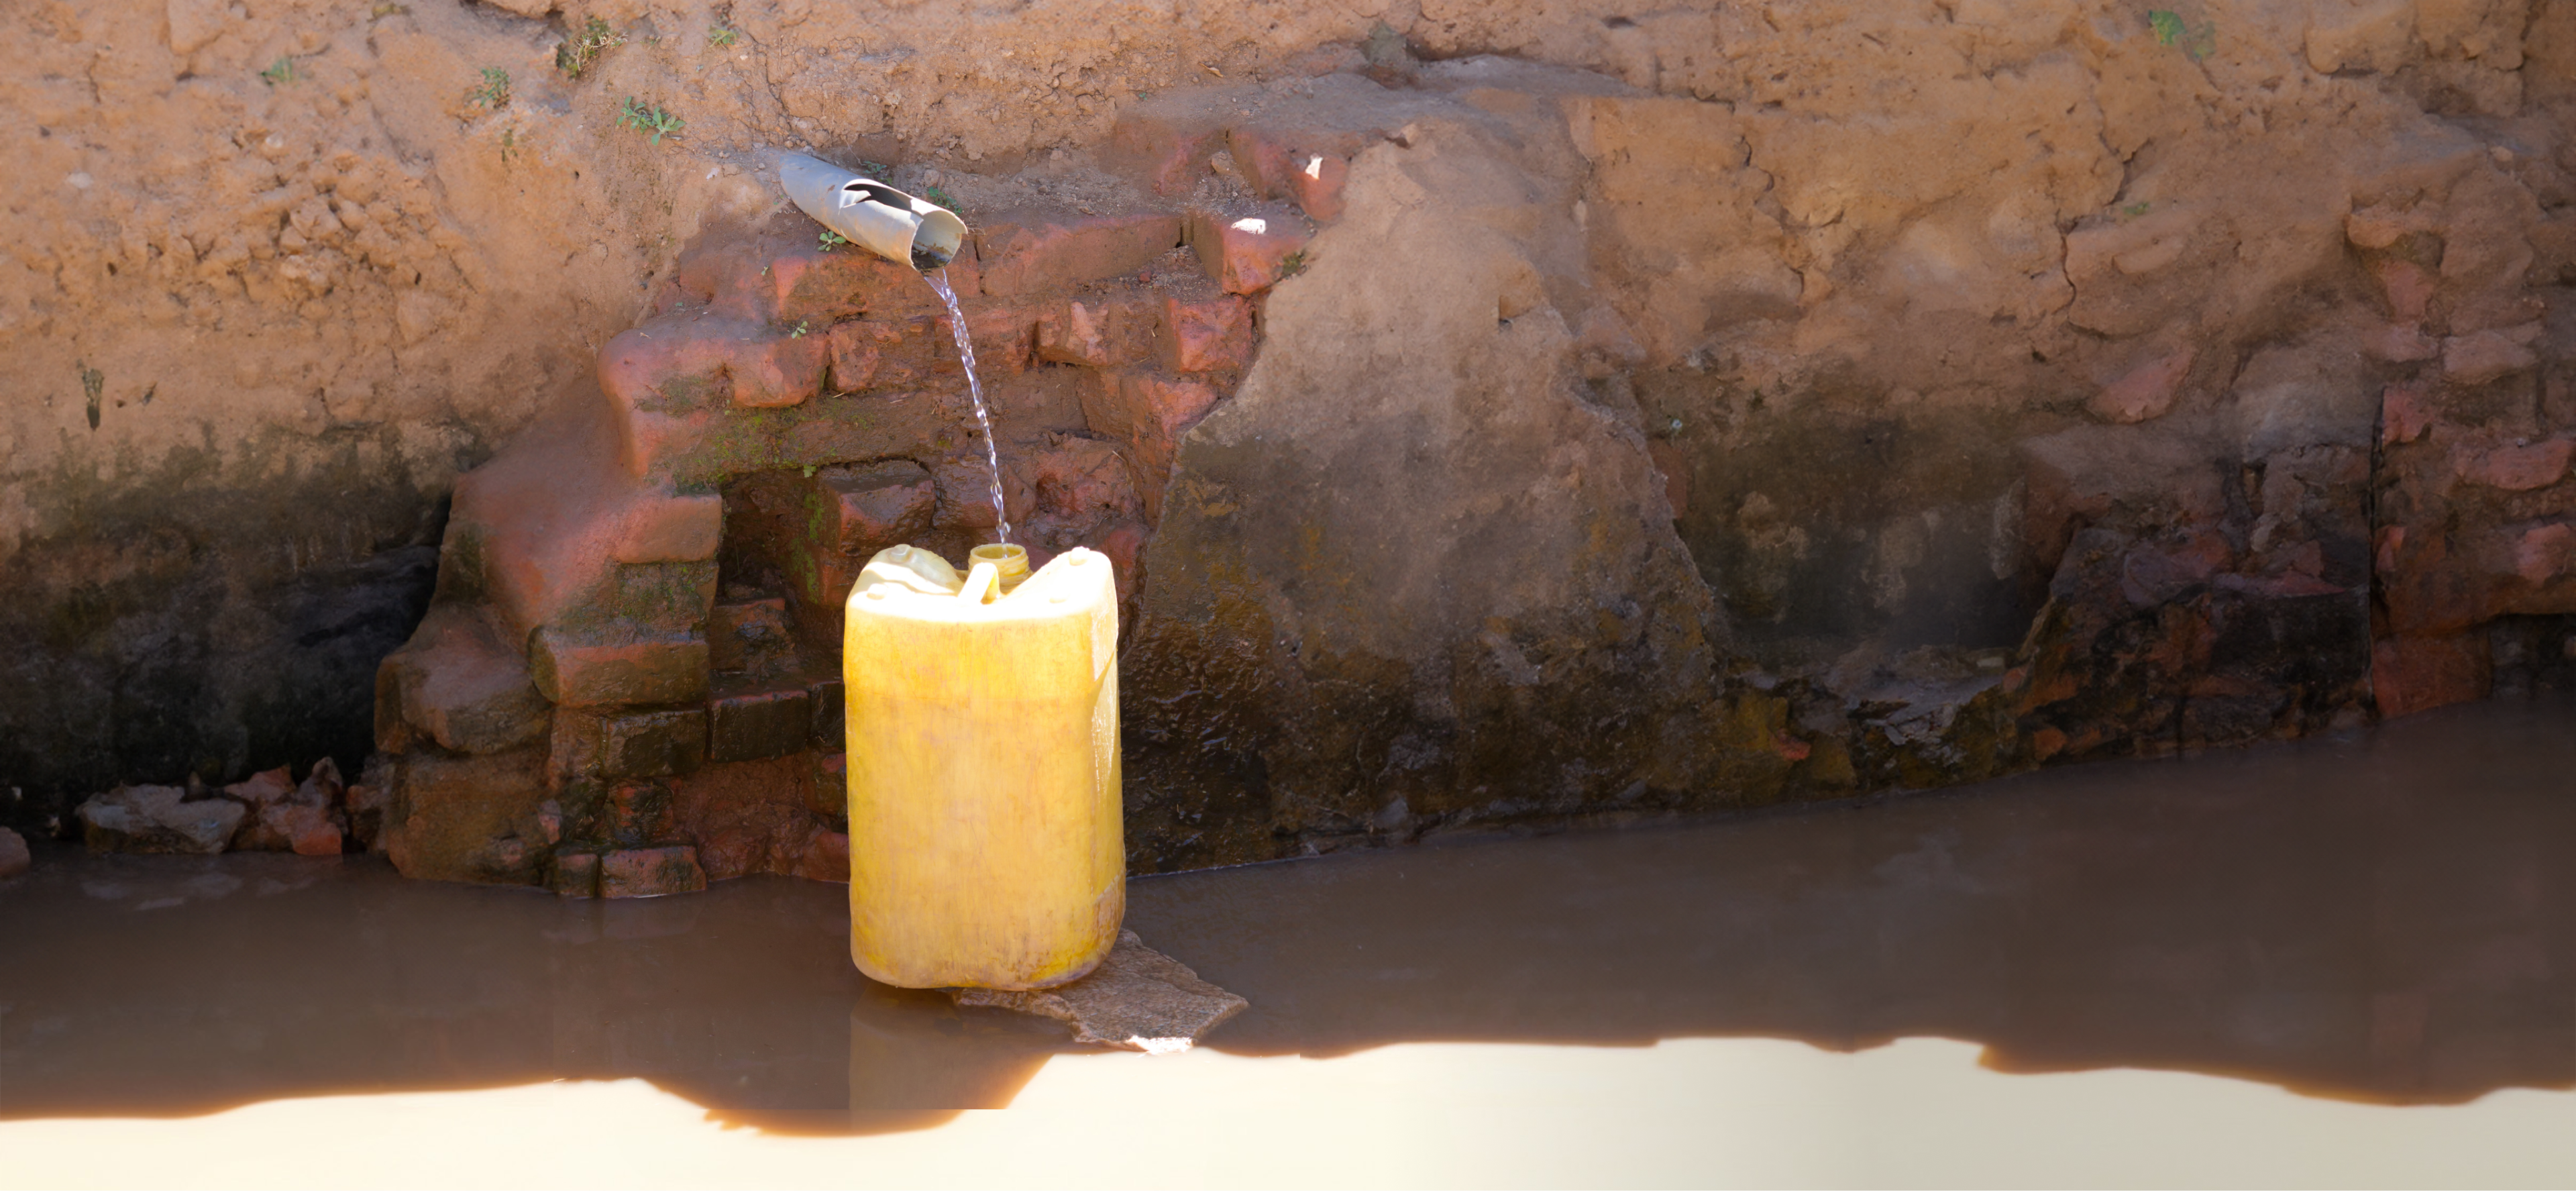 A typical jerry can that is used across Madagascar to collect water